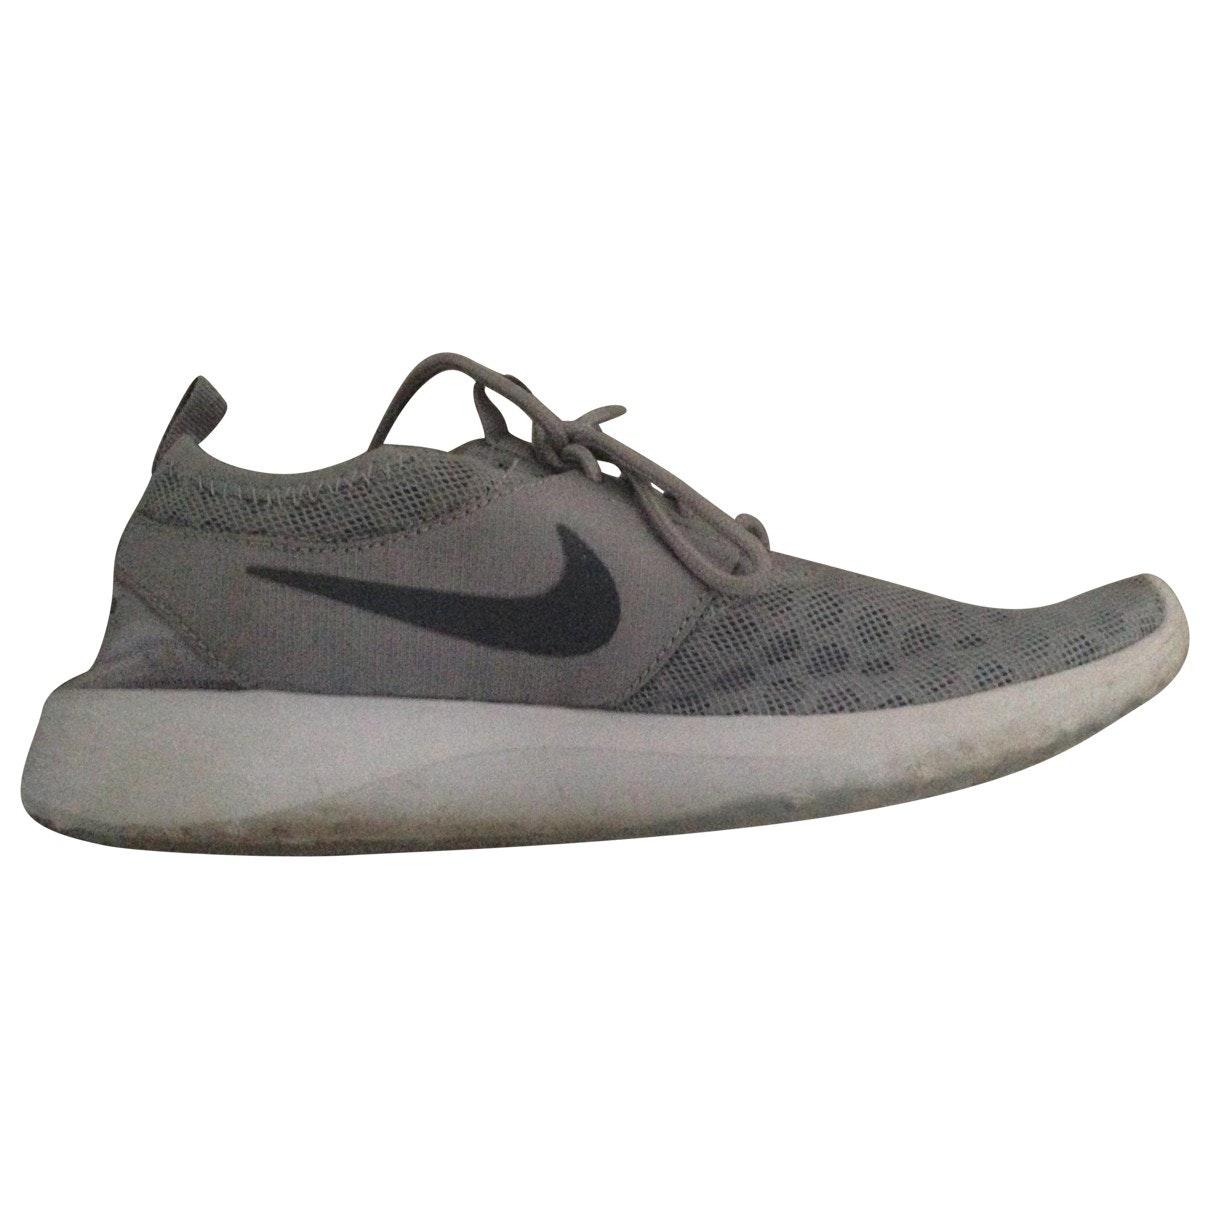 nike cloth shoes Off 66% - www.electroparedes.pt